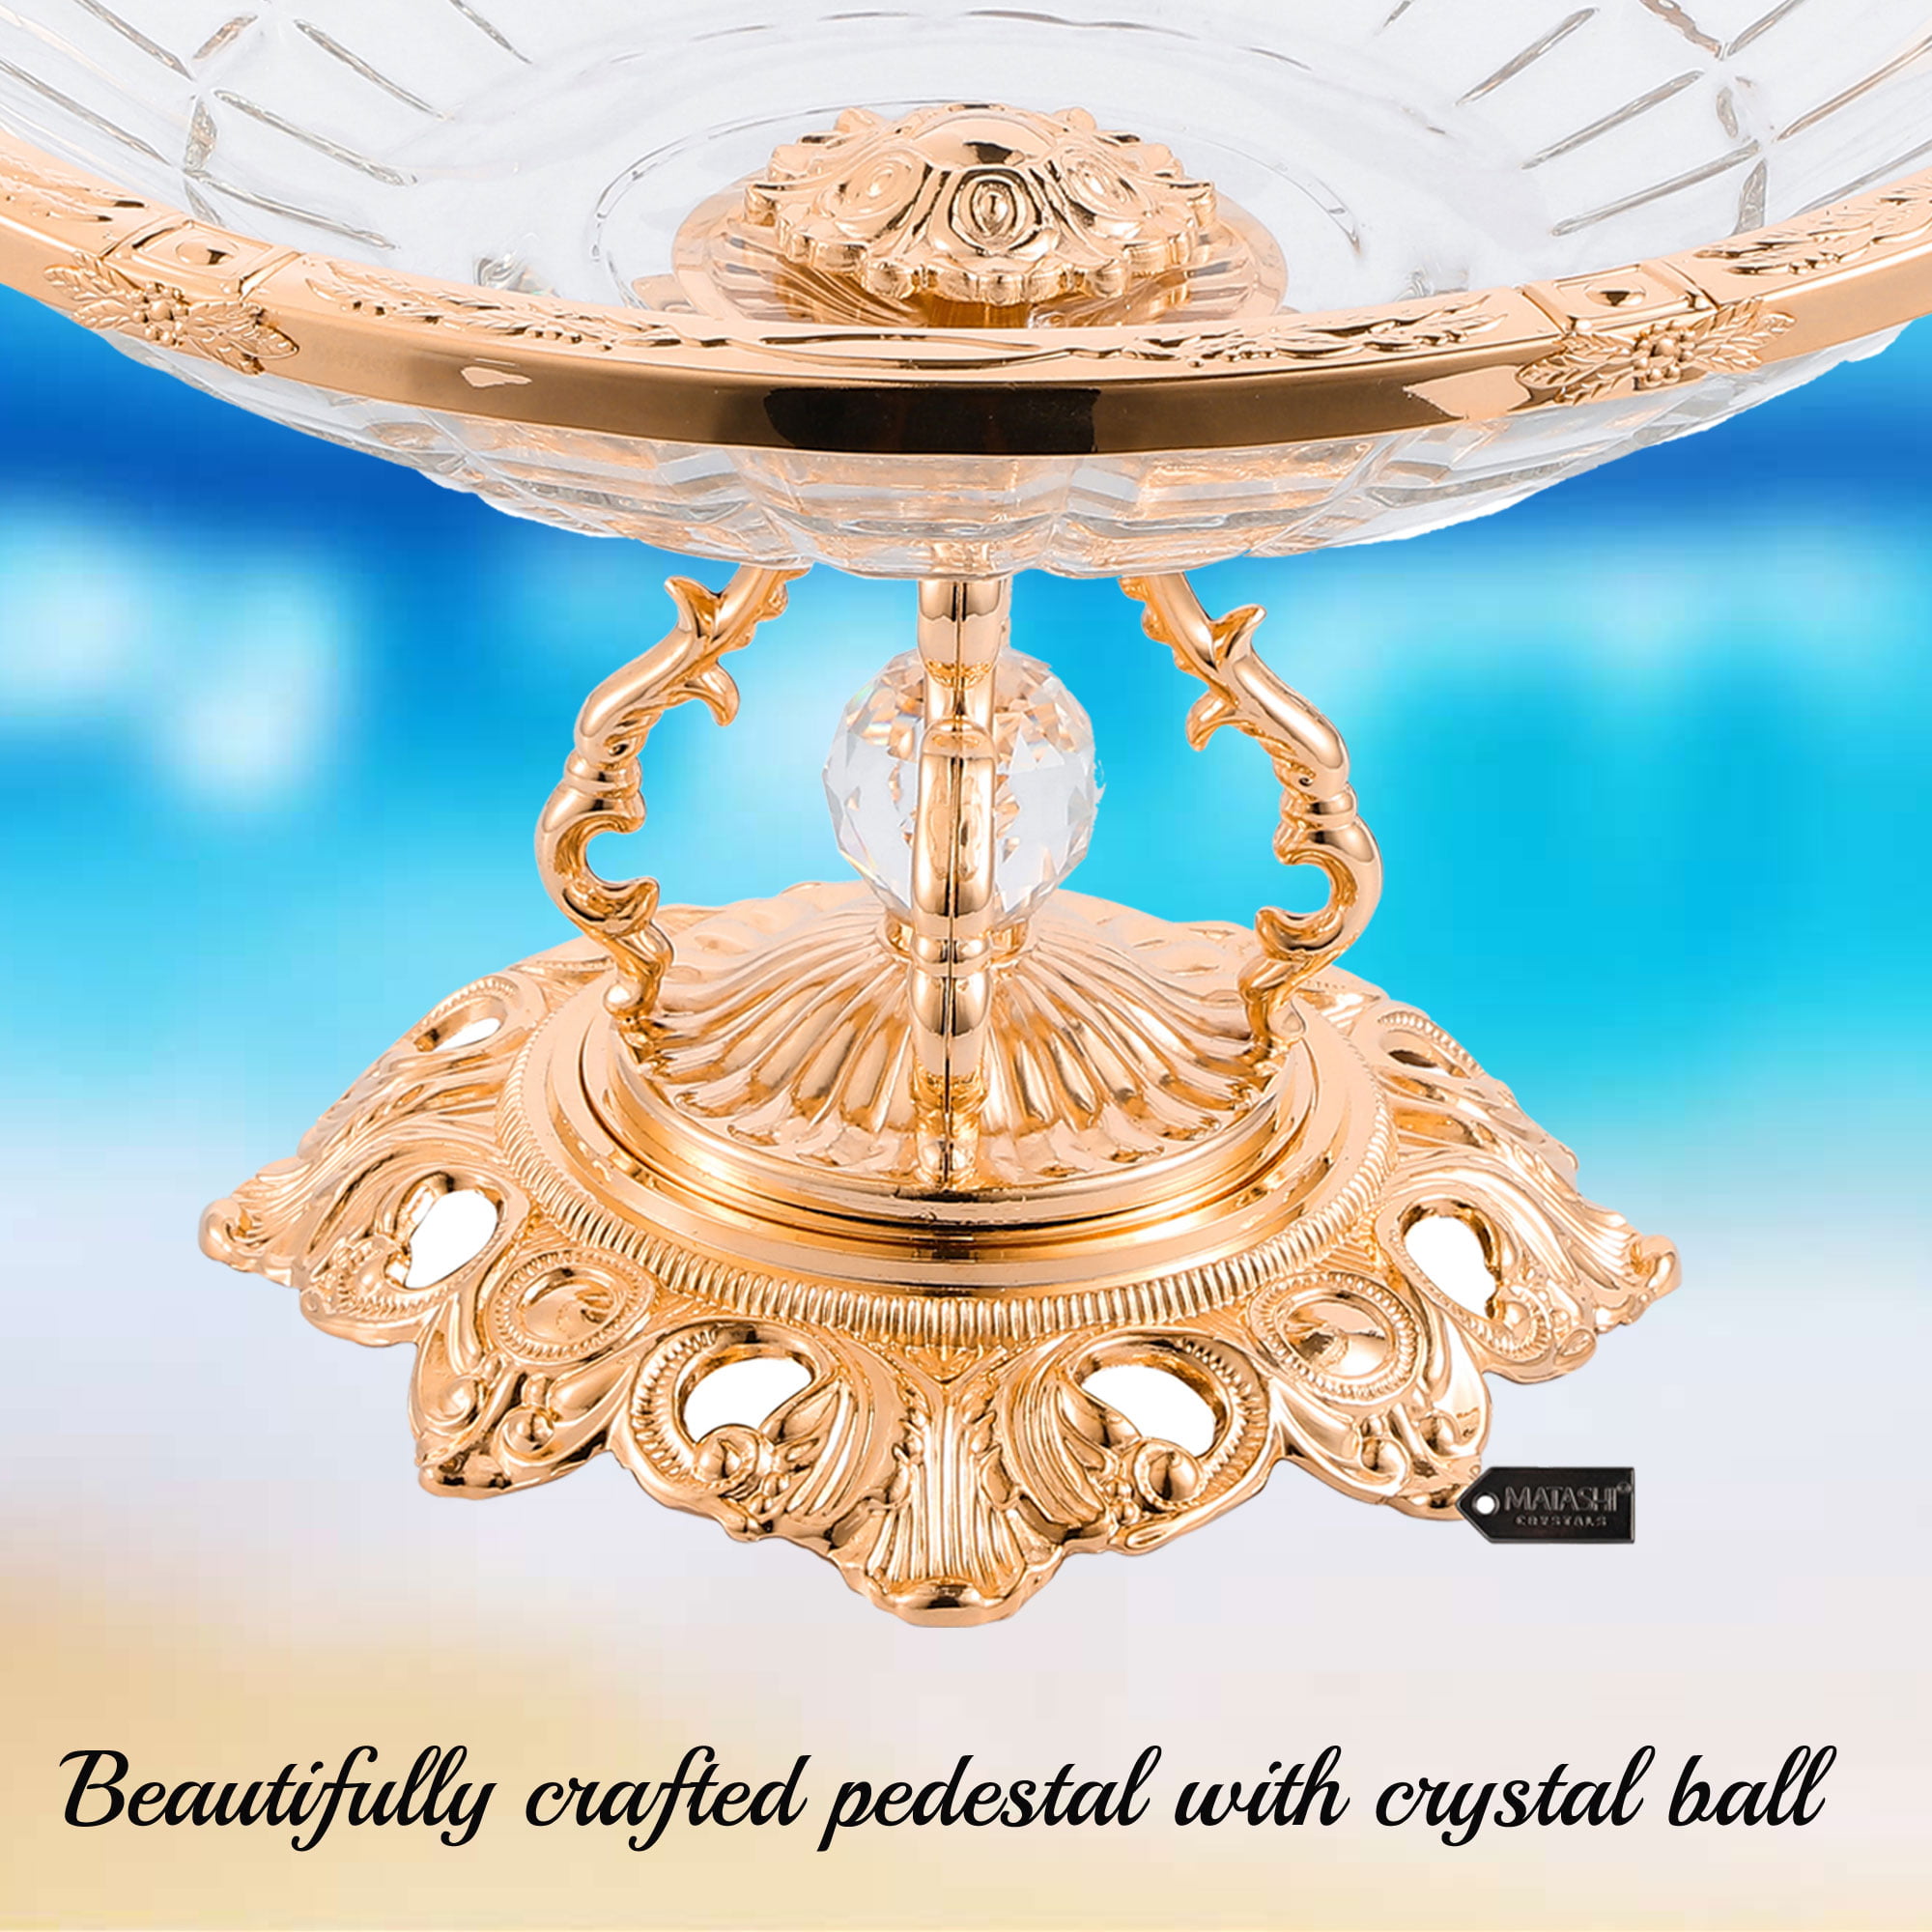 Matashi Home Decorative Dining Tabletop Showpiece Crystal Candy Centerpiece  Decorative Bowl Plate Dish, Round Serving Platter with Rose Gold Plated 